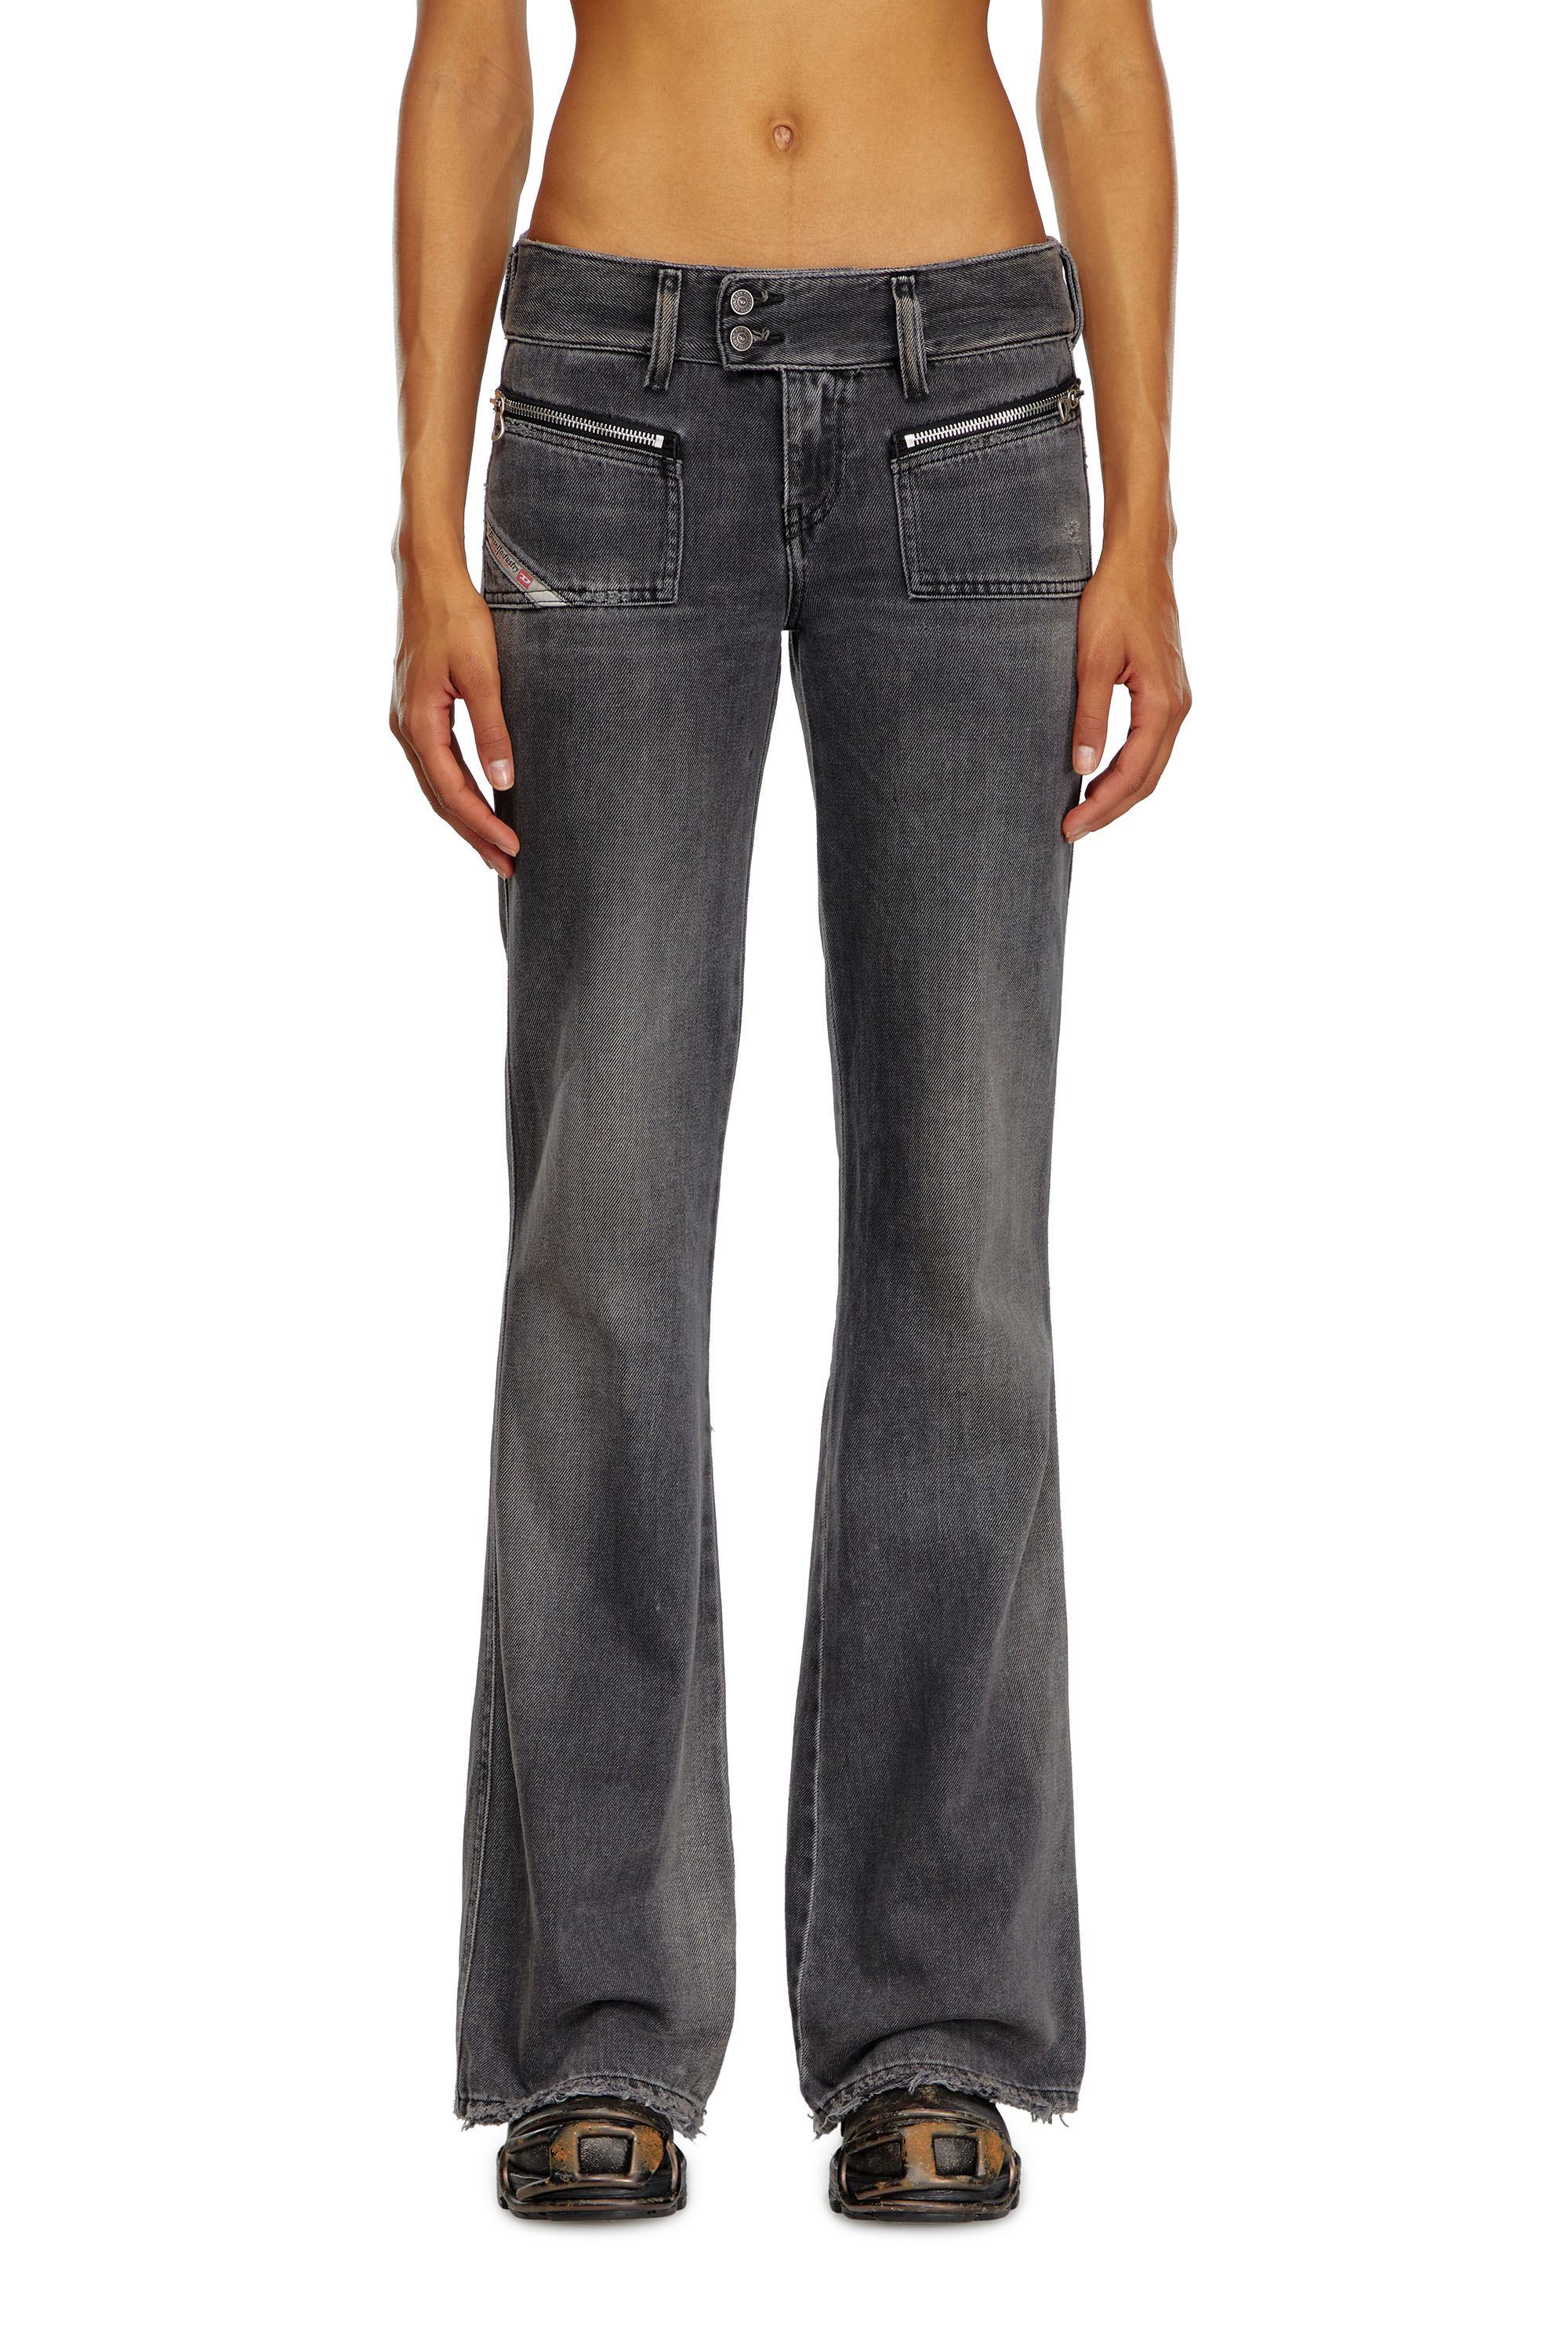 Diesel - Bootcut and Flare Jeans D-Hush 09K14, Mujer Bootcut y Flare Jeans - D-Hush in Negro - Image 1